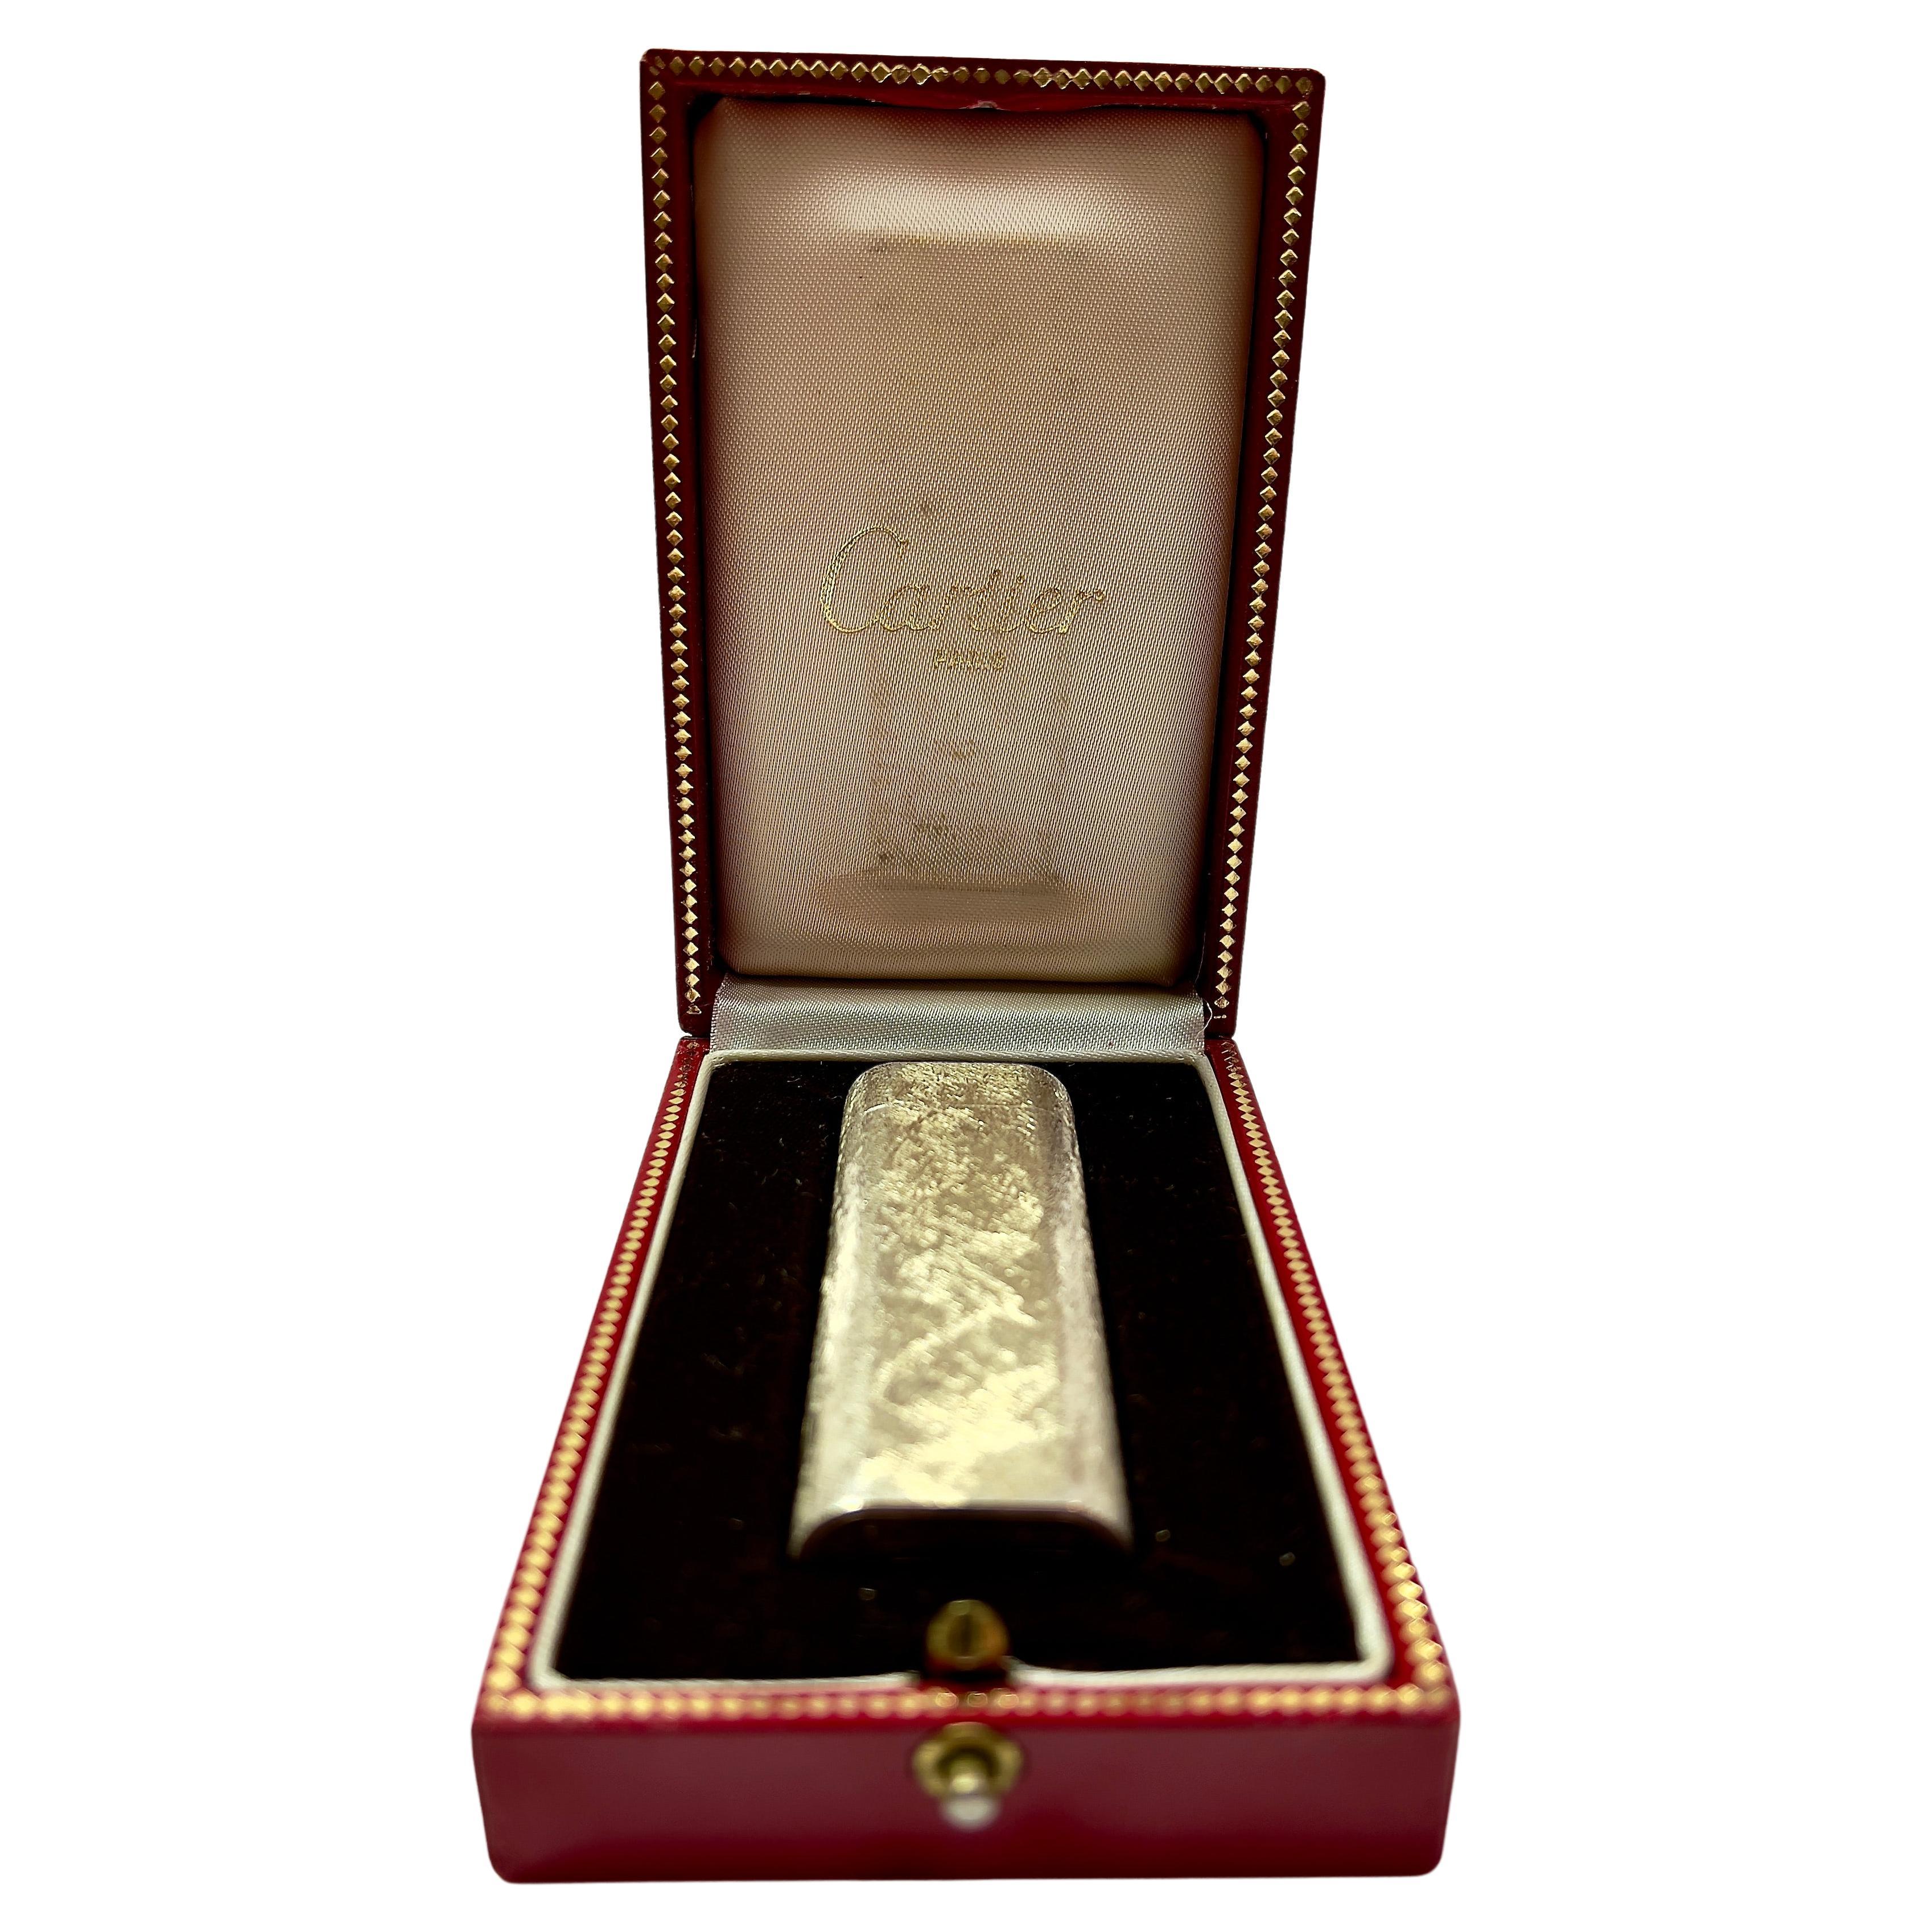 Absolutely stunning Cartier lighter. This beautiful lighter has an elegant cross engraving design. Its elegant slim vesta is classy and luxurious. Lighter is in wonderful condition in its original beautiful red Cartier Paris push open box.

Vesta